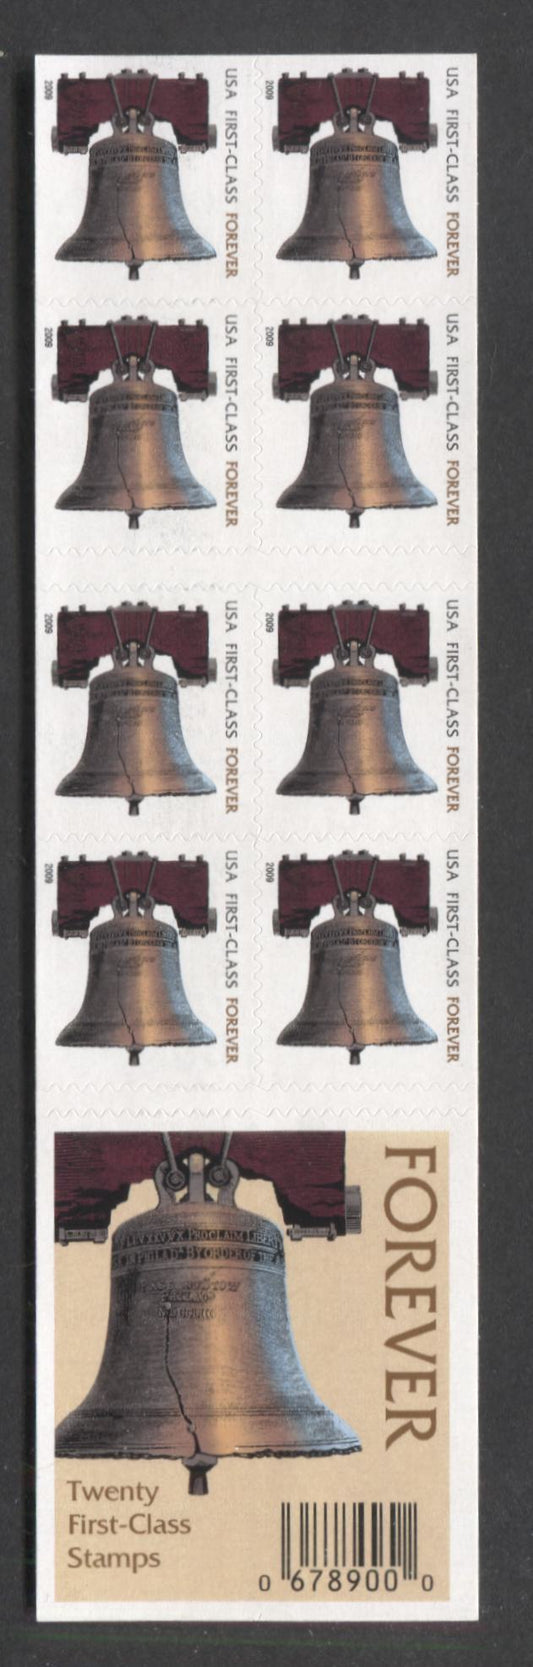 Lot 27 United States SC#4125g First Class Multicolored 2008 Liberty Bell Issue, Double Sided Booklet, Dated 2008, Large Microprinting, A VFNH Booklet Of 20, Click on Listing to See ALL Pictures, 2017 Scott Cat. $18